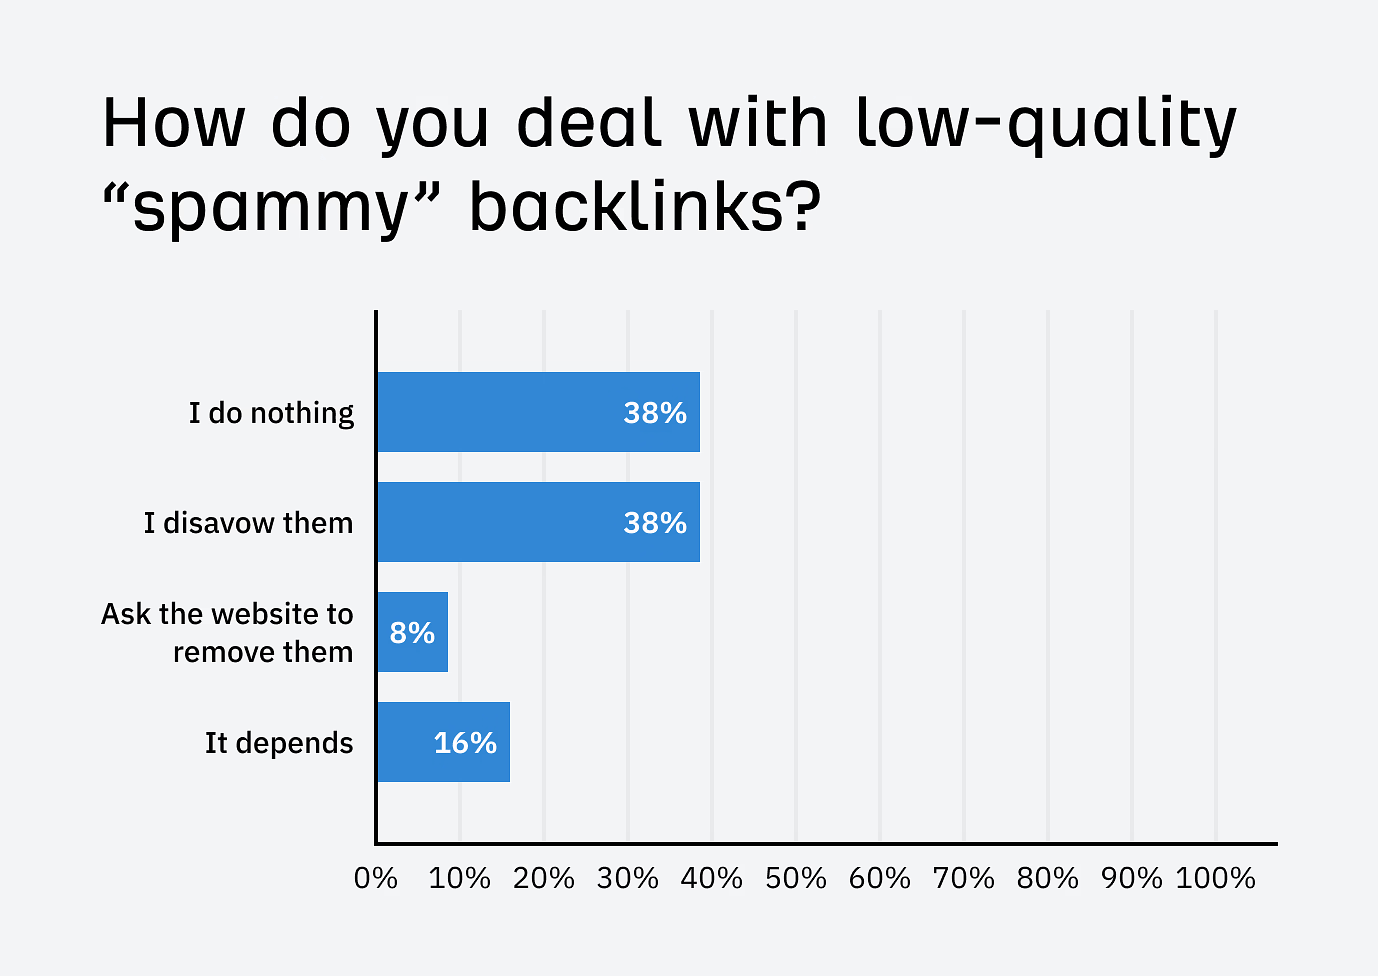 Most SEOs either disavow or do nothing about spammy backlinks